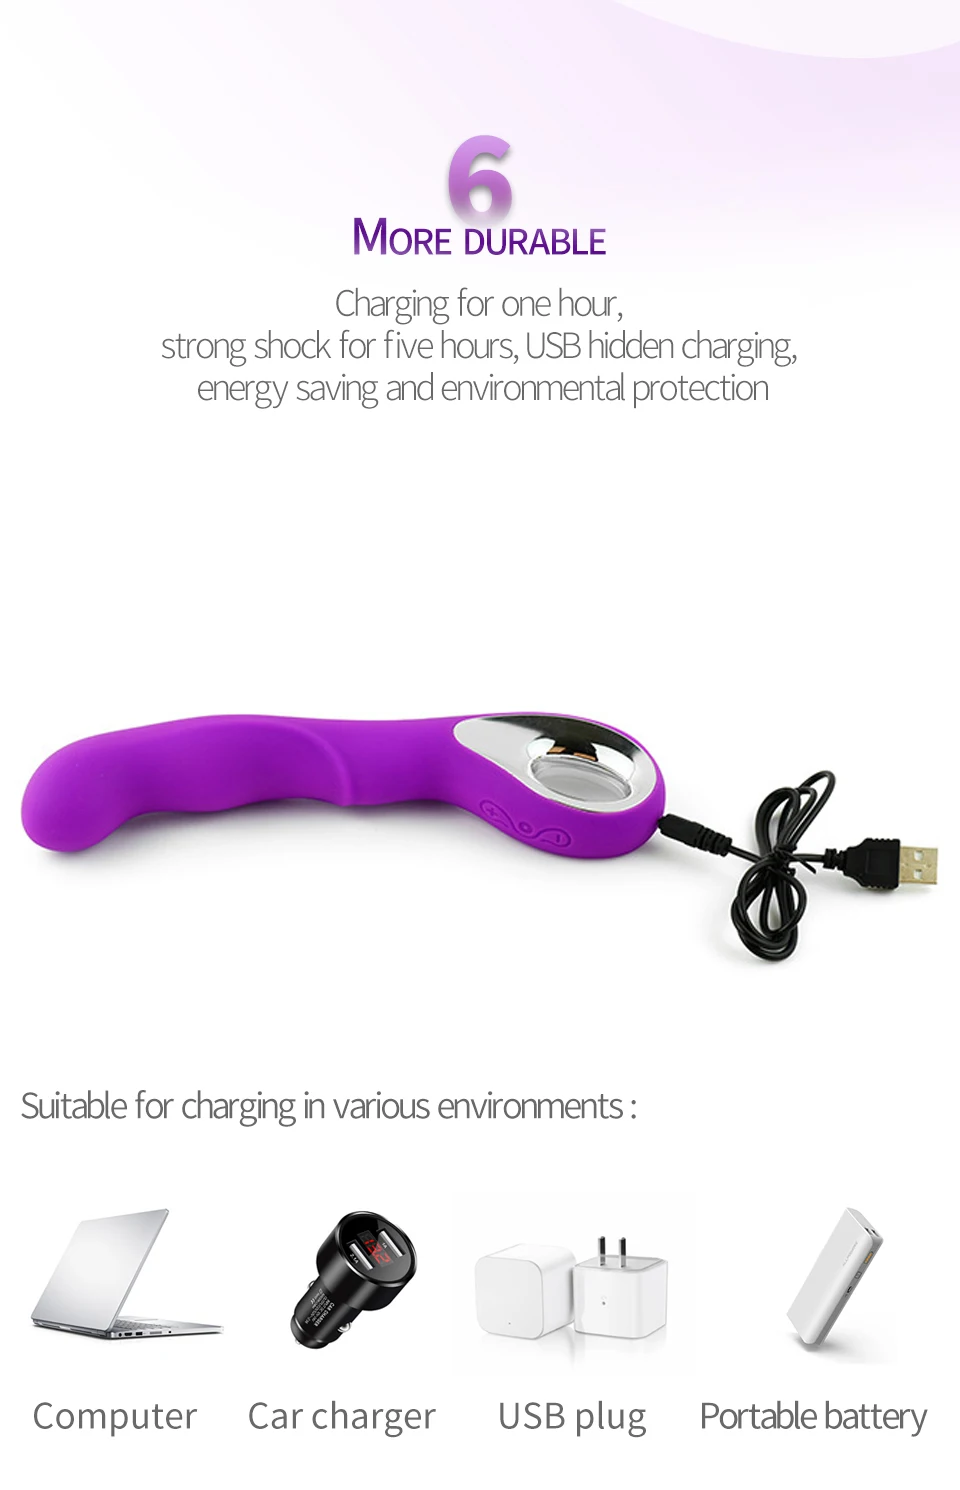 USB Rechargeable sex toy lady with custom logo